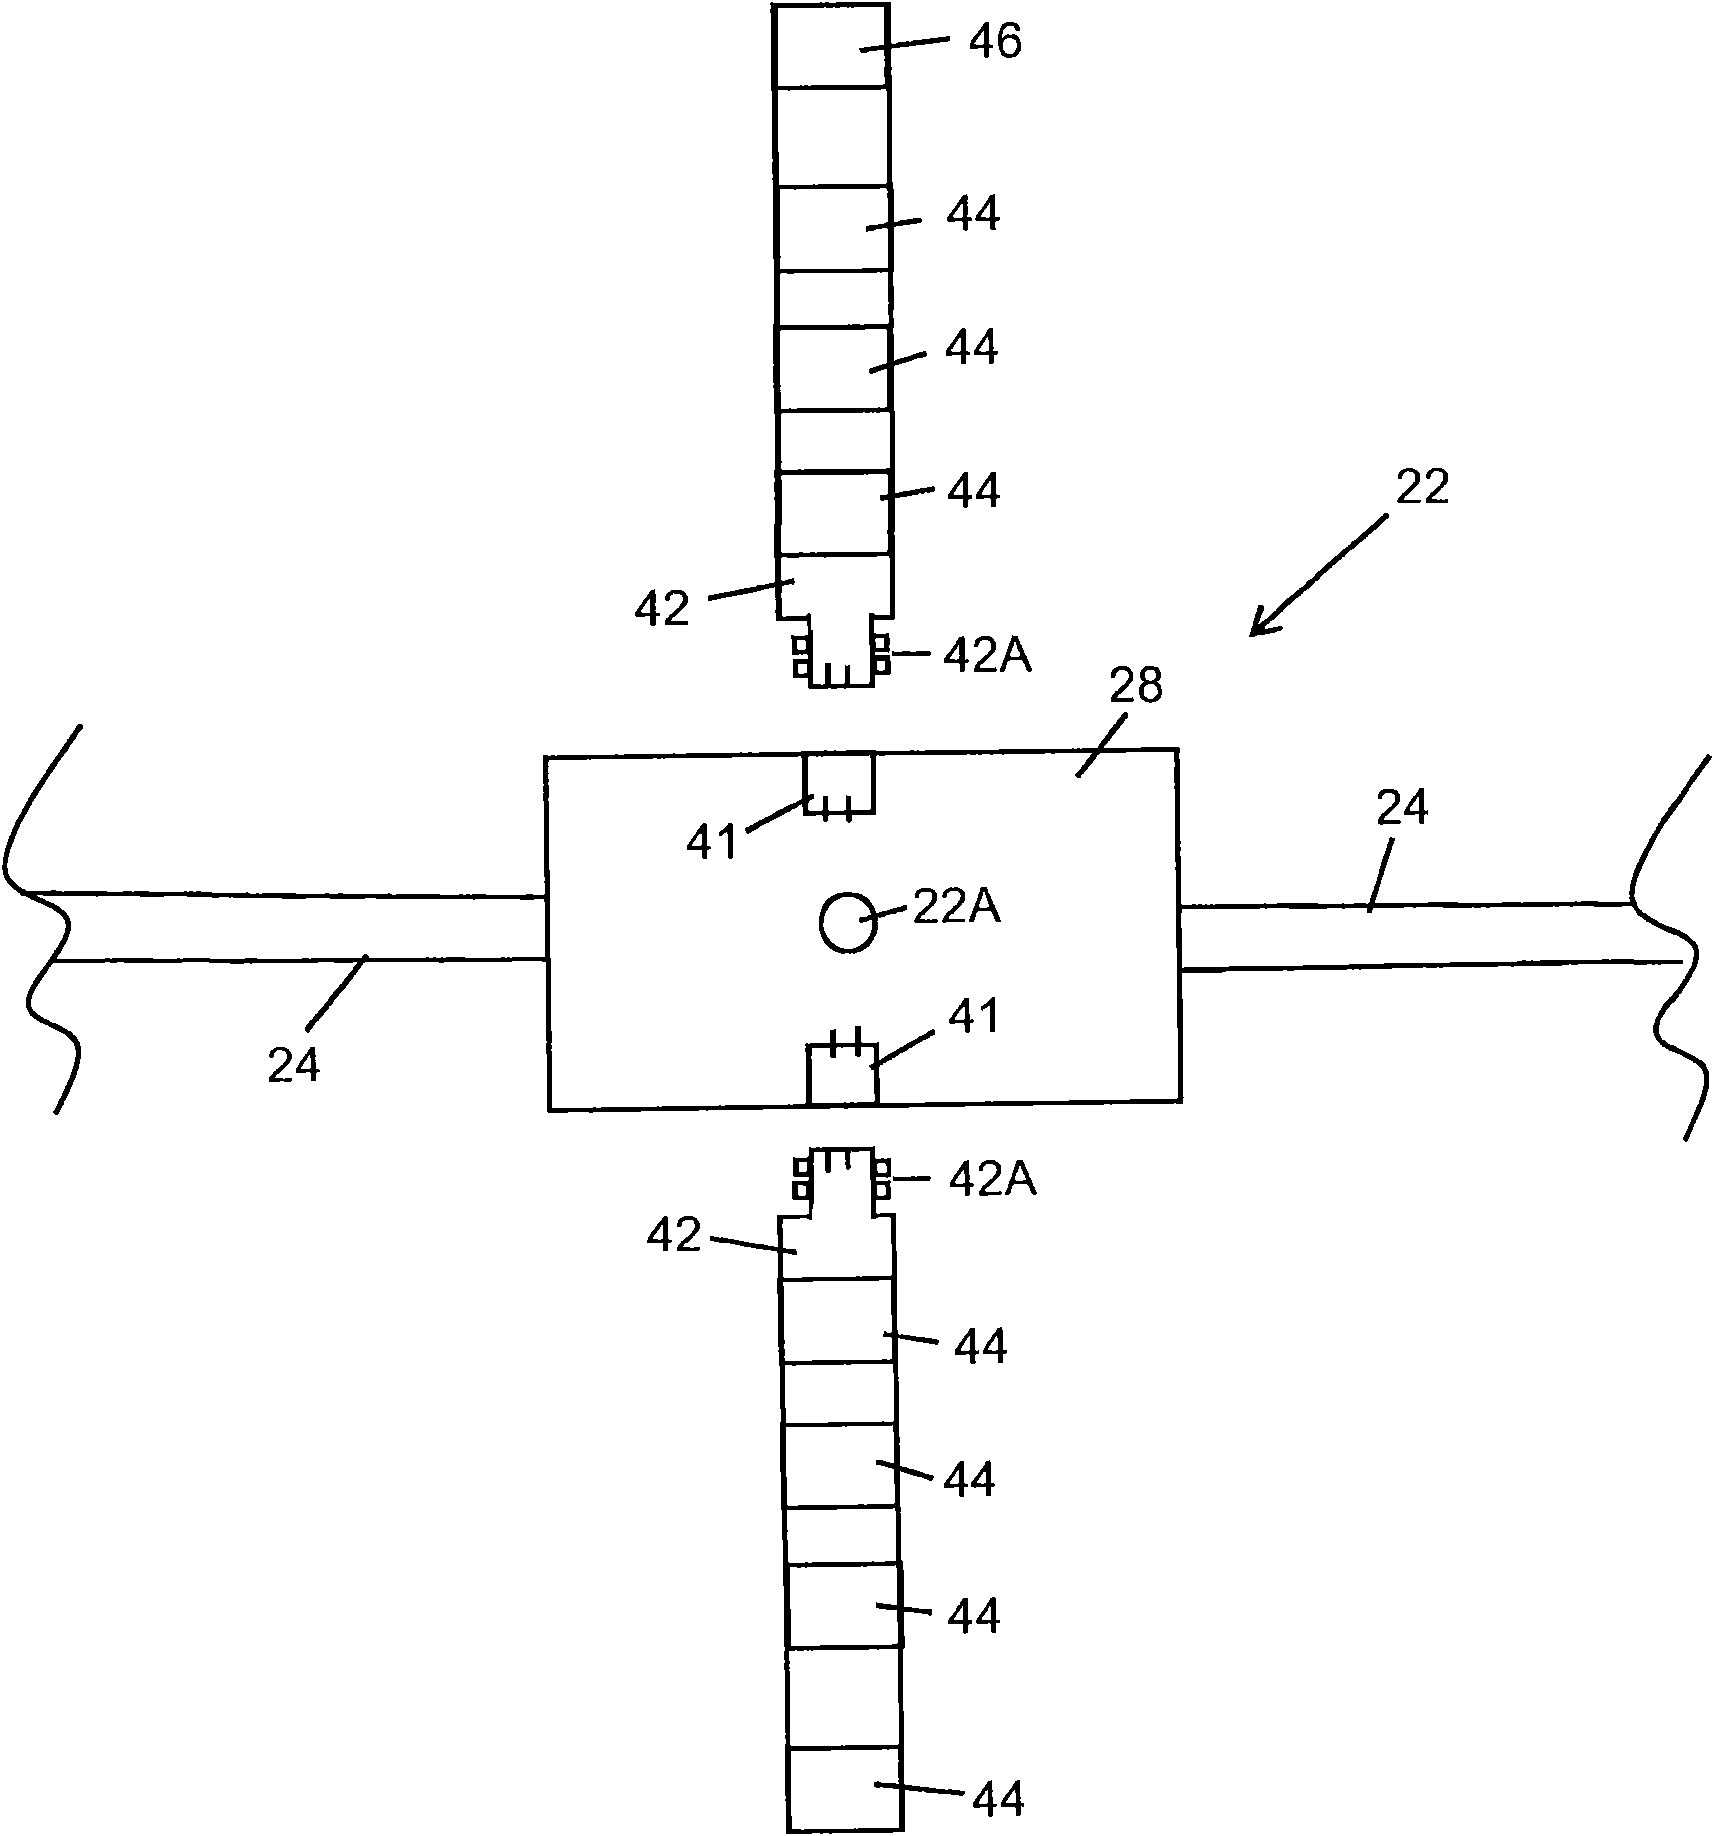 Multi-component marine electromagnetic signal acquisition cable, system and method